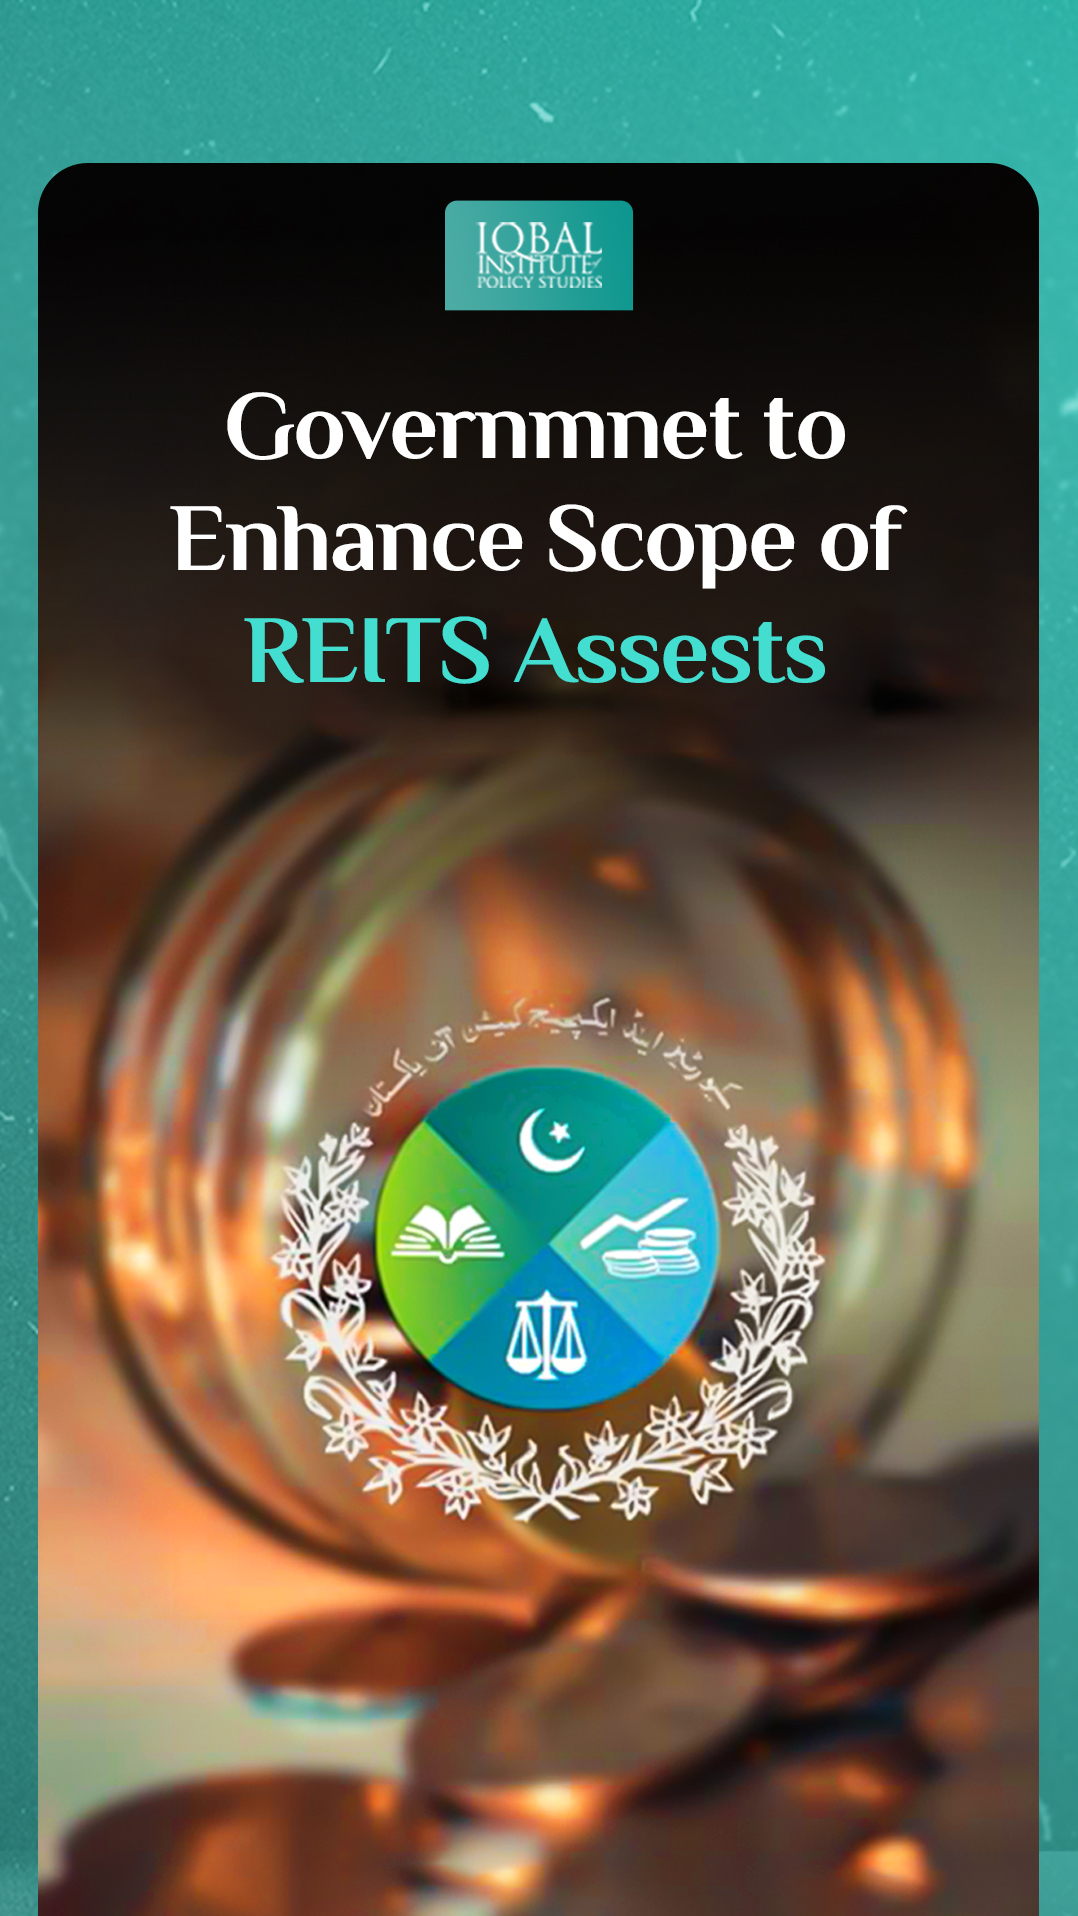 Government to enhance the scope of REIT Assets